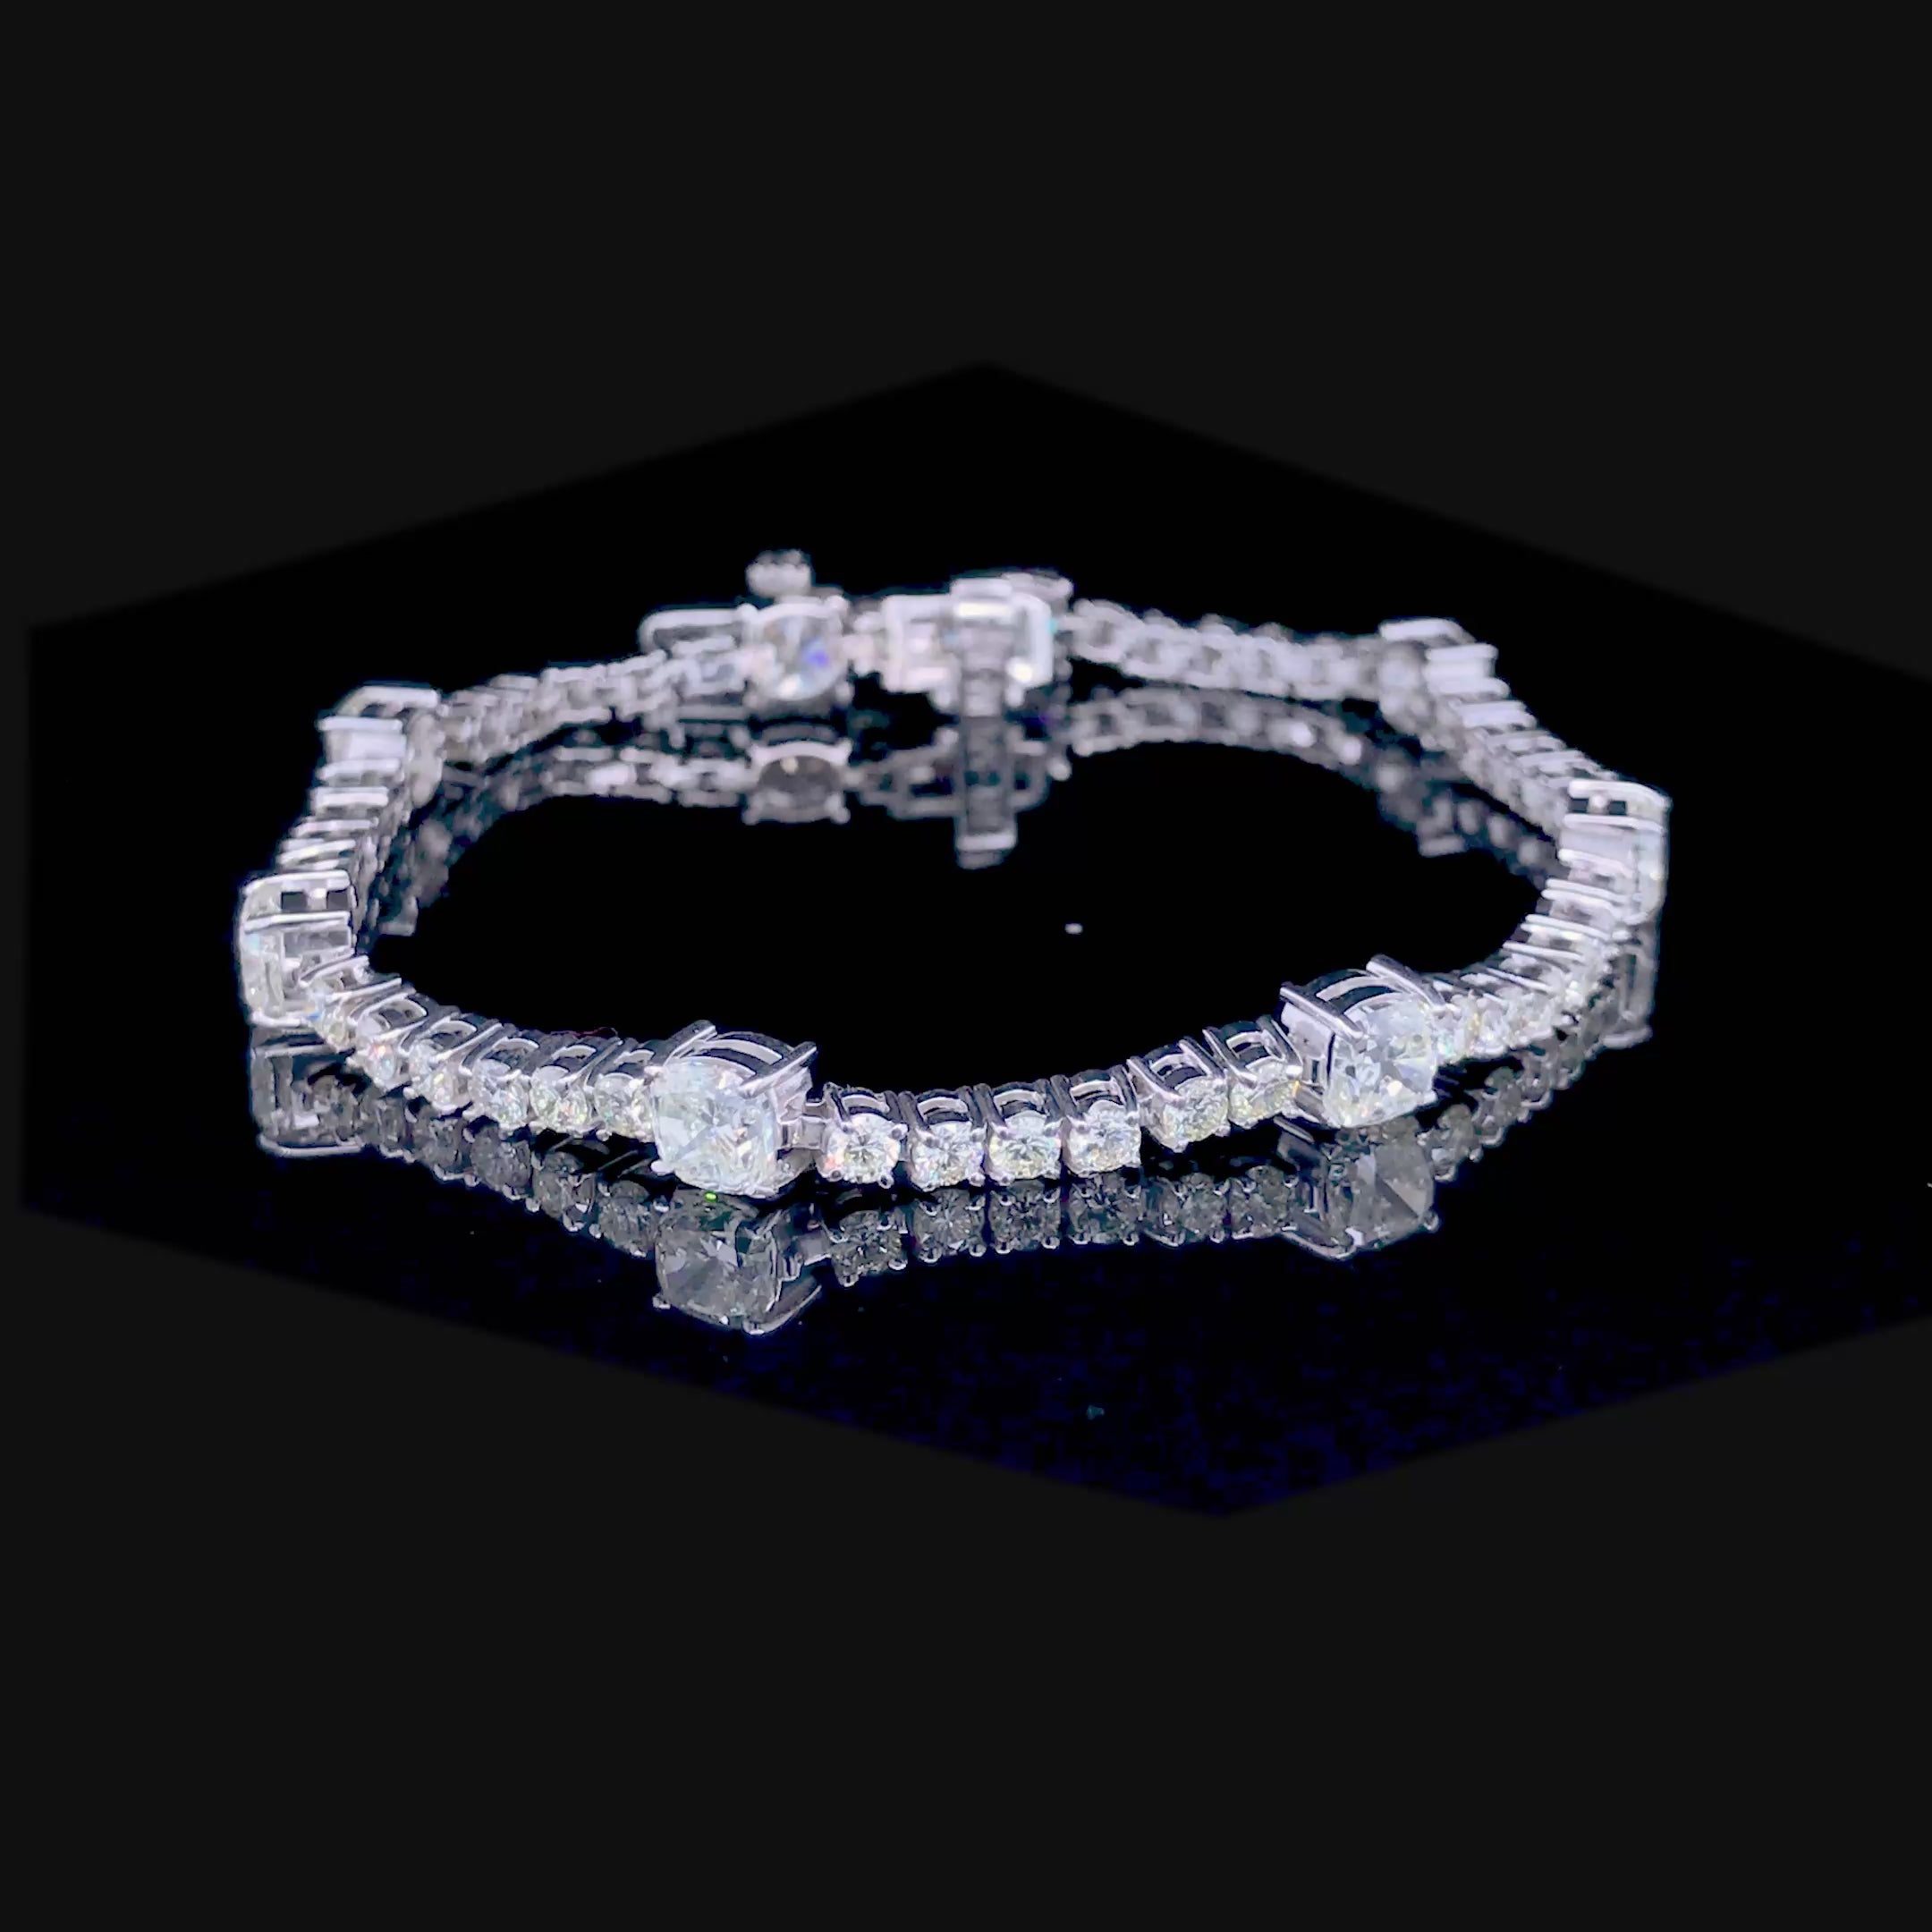 Luxurious 7.00CT Cushion and Round Cut Diamond Tennis Bracelet in 14KT White Gold